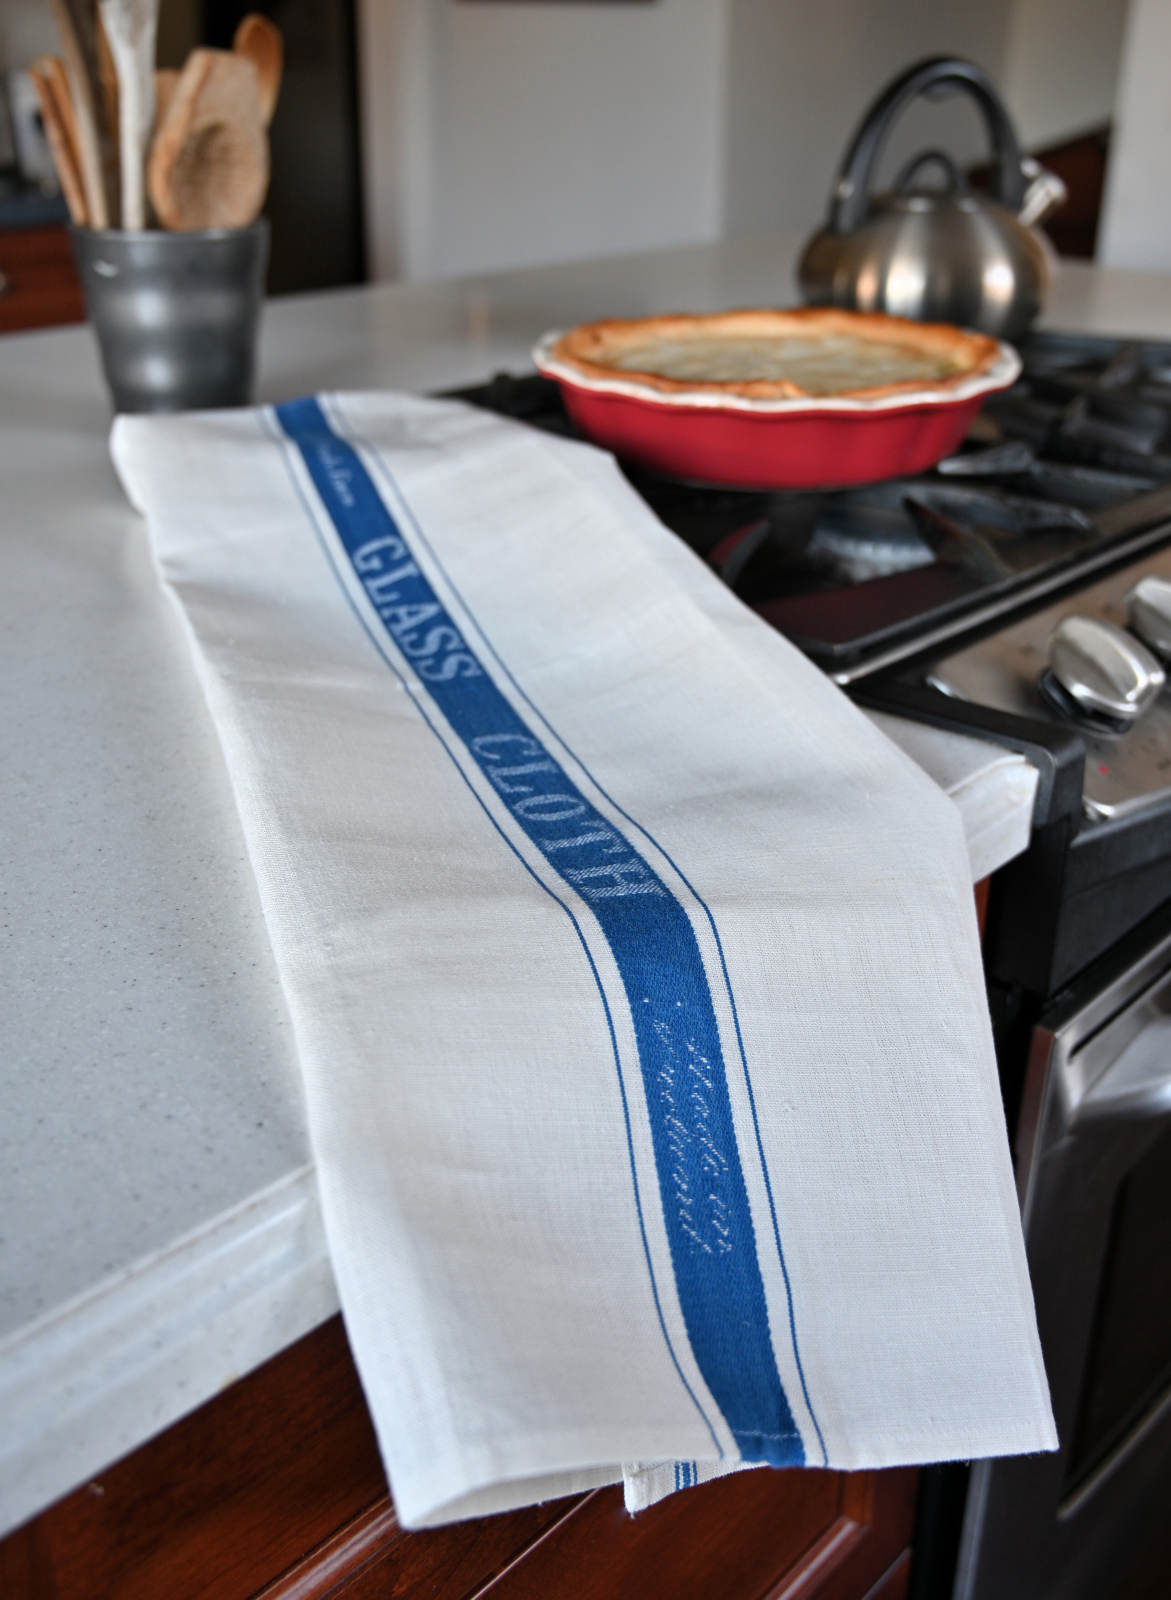 Dish Towel in Blue and White